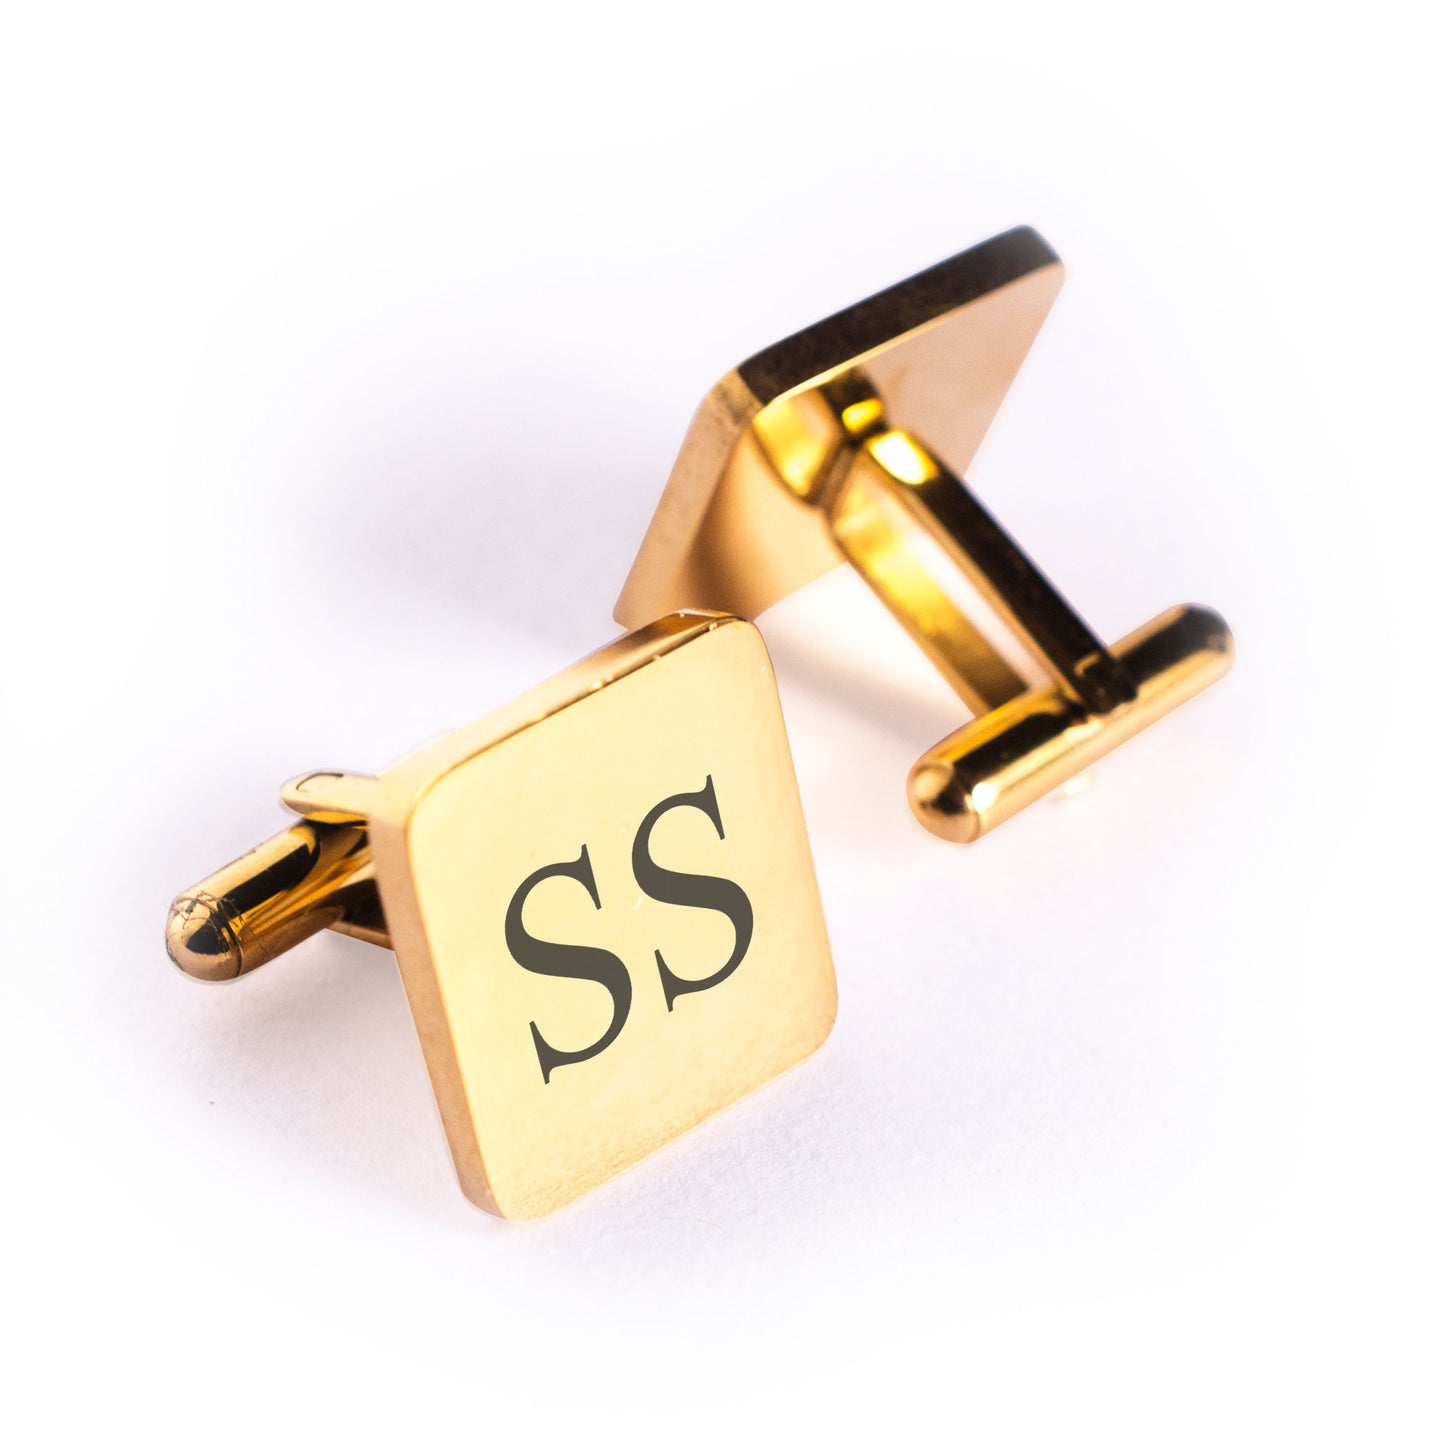 Engraved Stainless Steel Square Initials Cufflinks Gift | Fathers day Wedding Birthday Valentines day